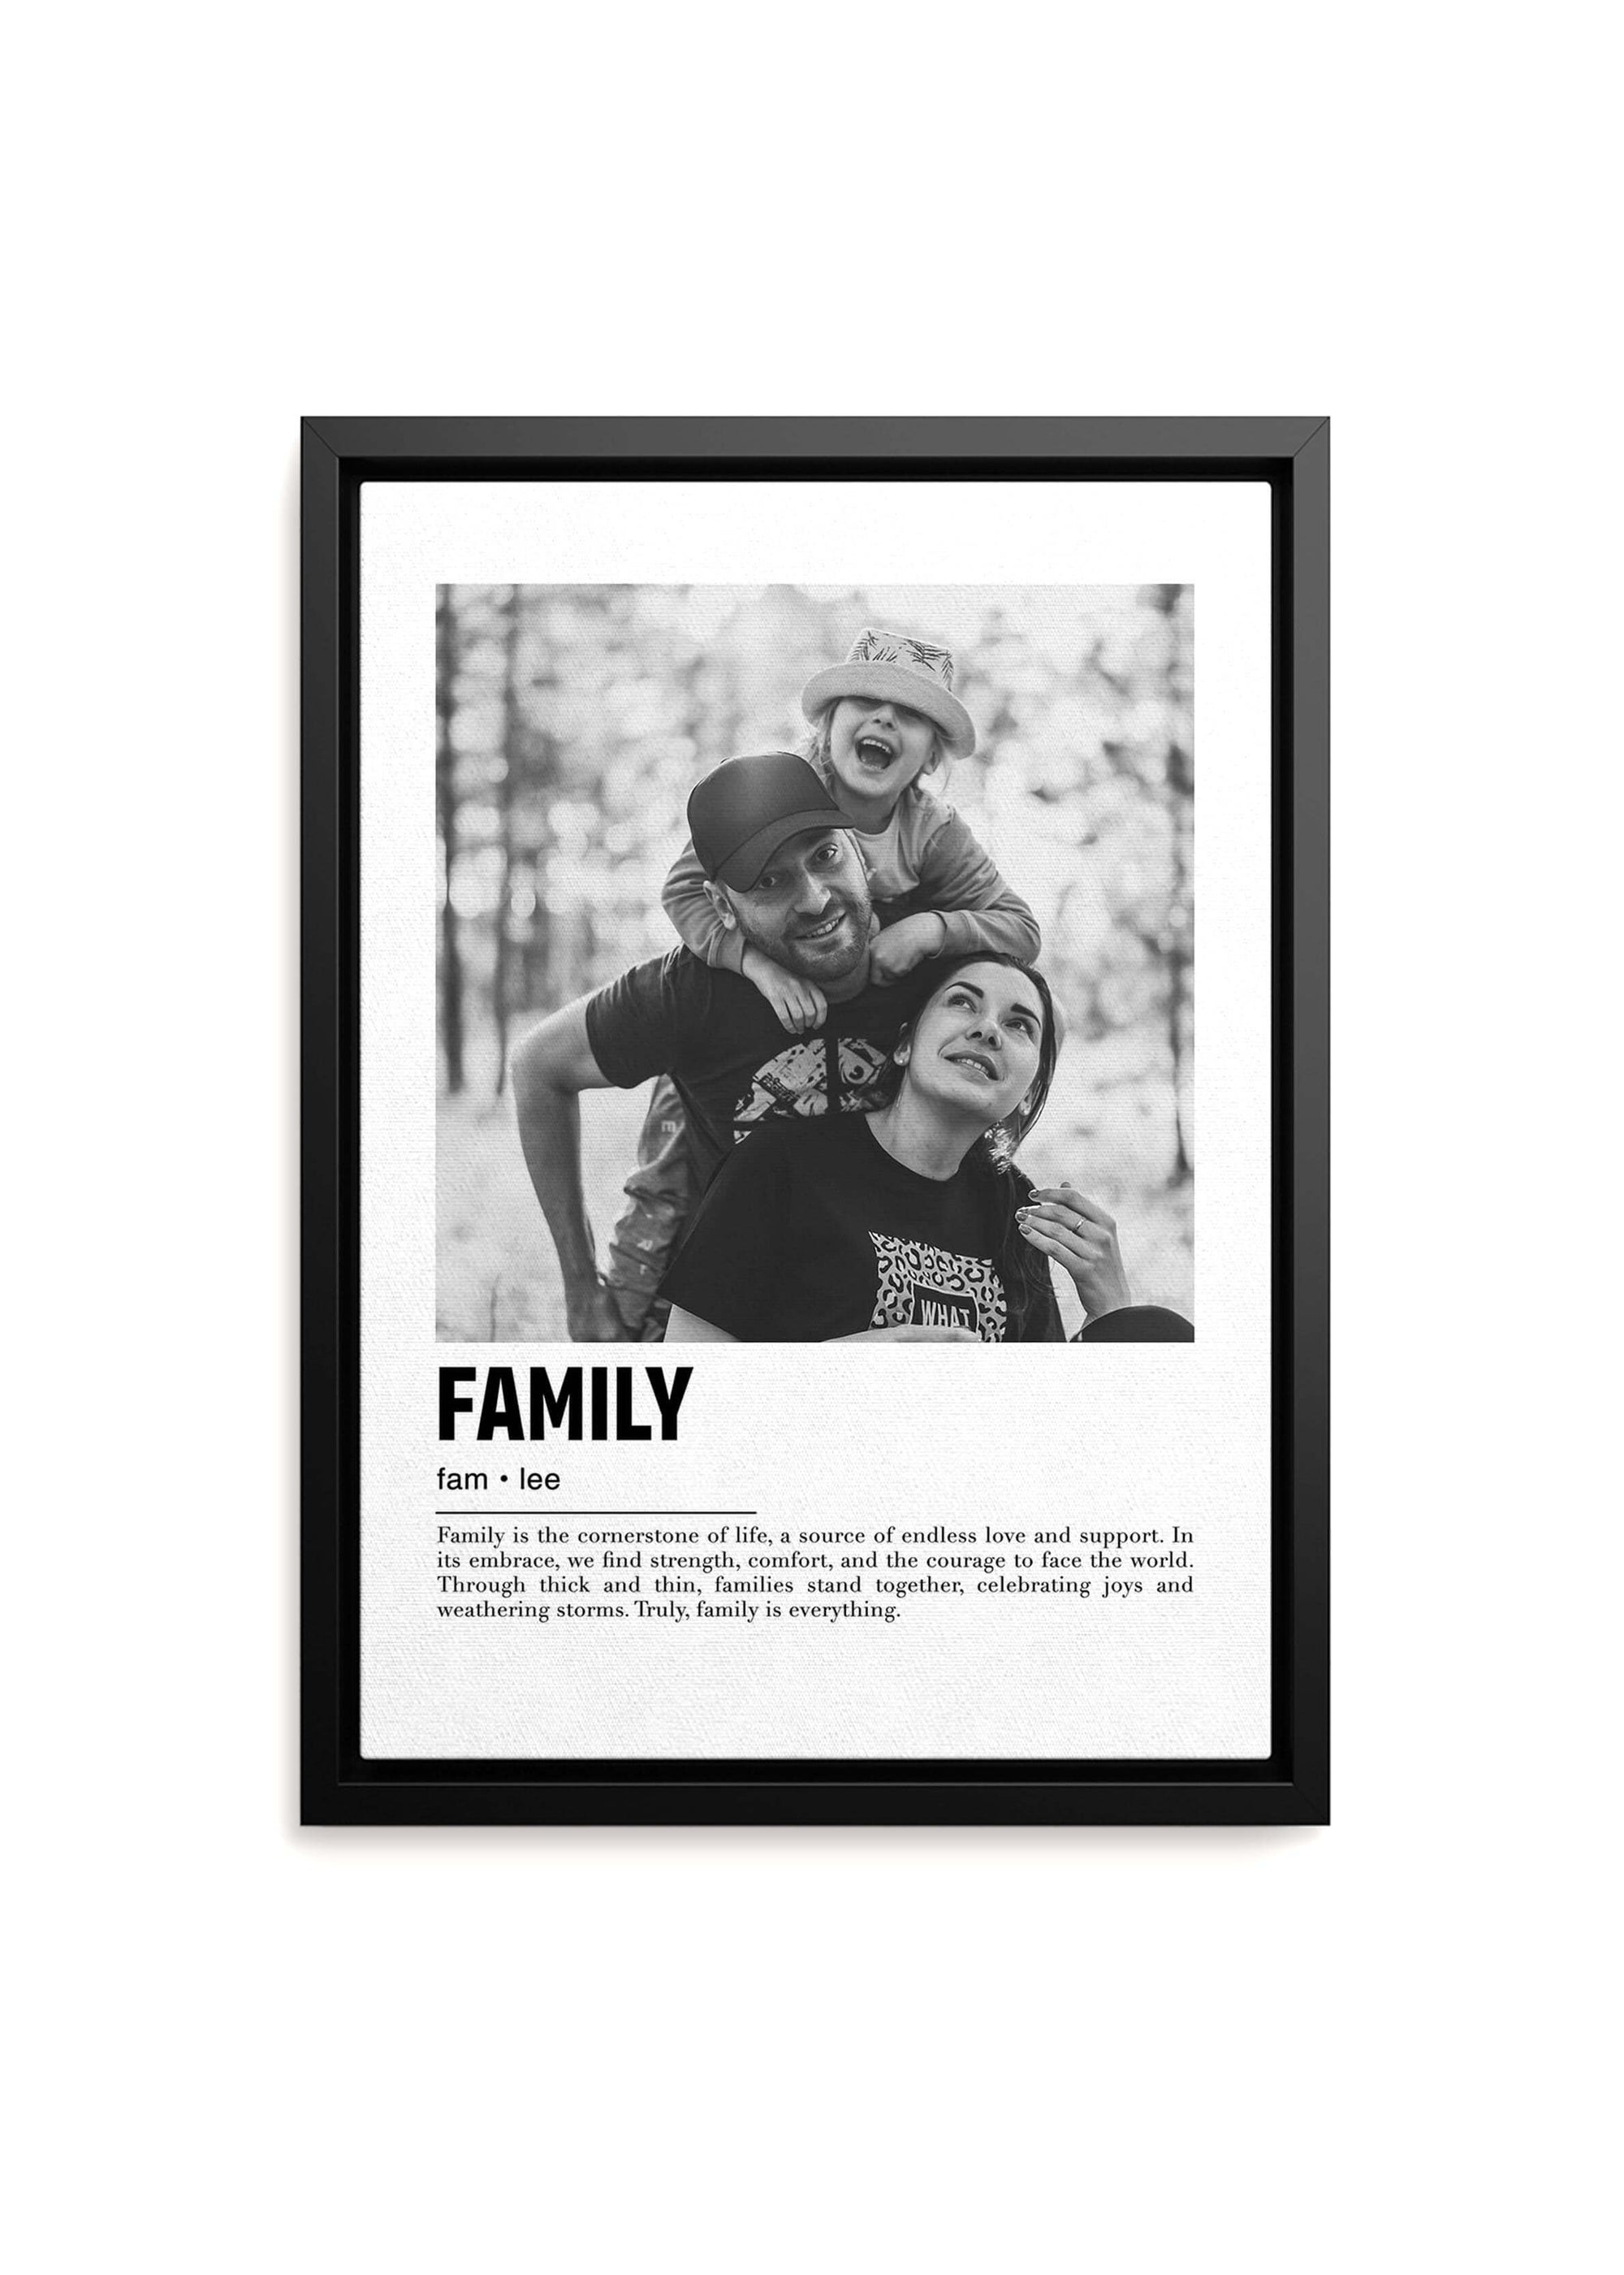 Personalized black and white photo gift on black framed canvas with custom caption on white background.